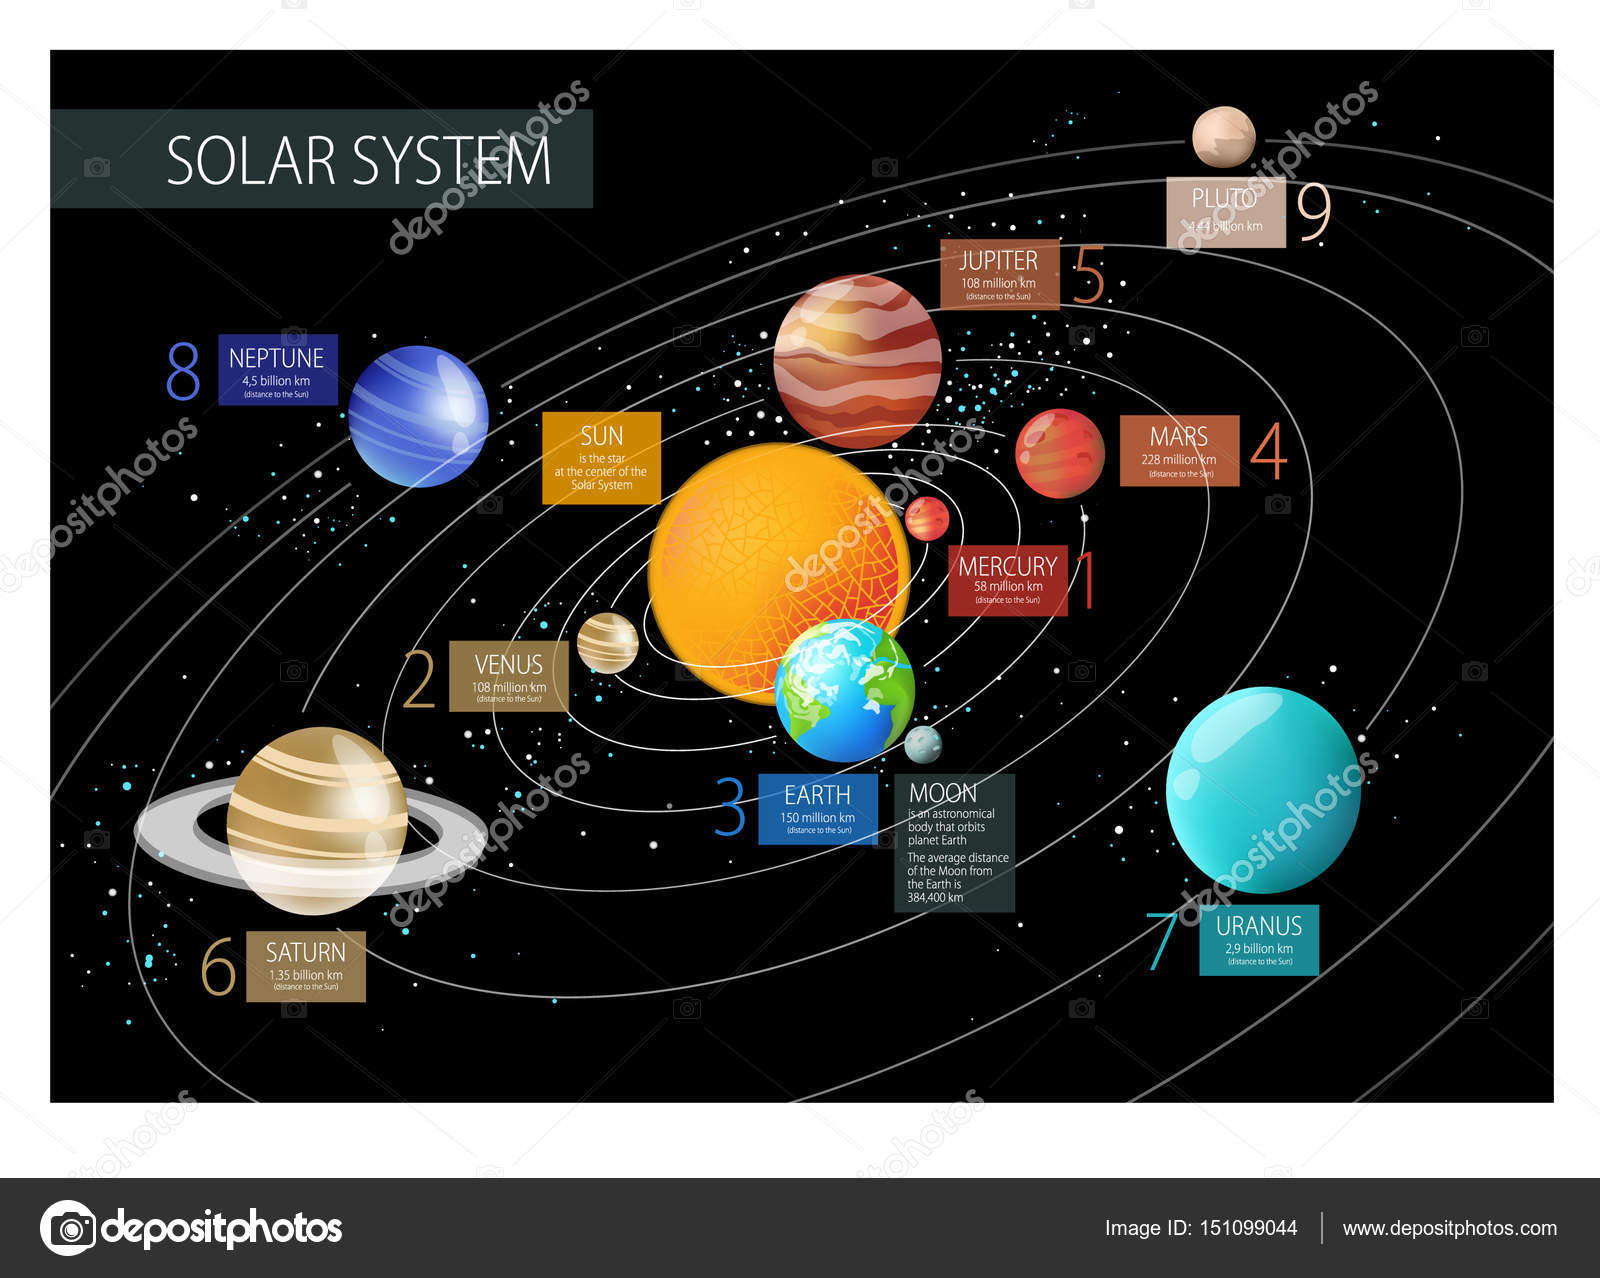 EARTH SPACE POSTER STARS PLANETS SUN SOLAR SYSTEM SPACE